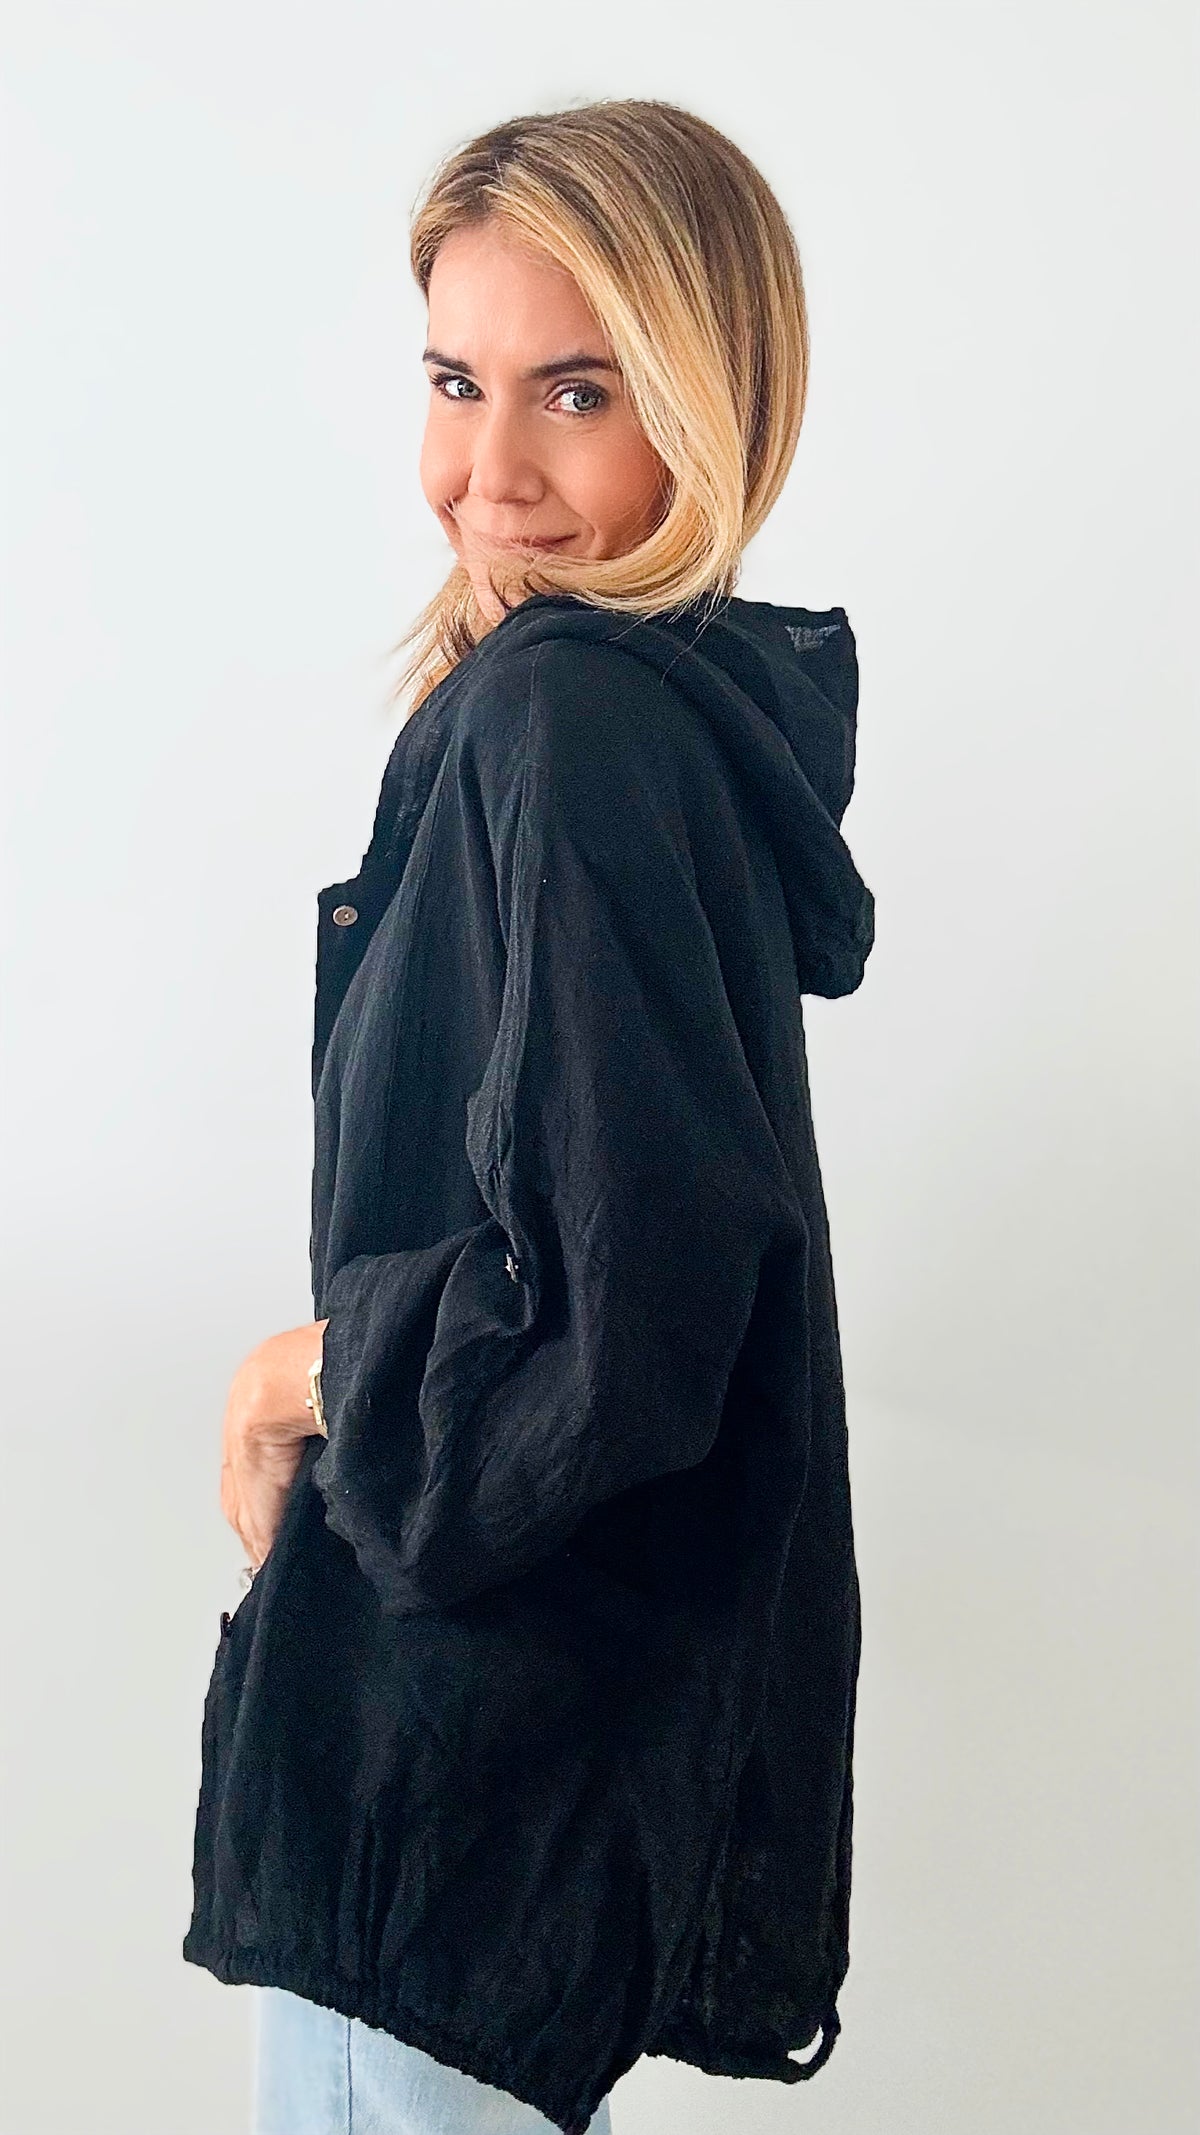 Sundown Hooded Italian Jacket - Black-160 Jackets-Italianissimo-Coastal Bloom Boutique, find the trendiest versions of the popular styles and looks Located in Indialantic, FL